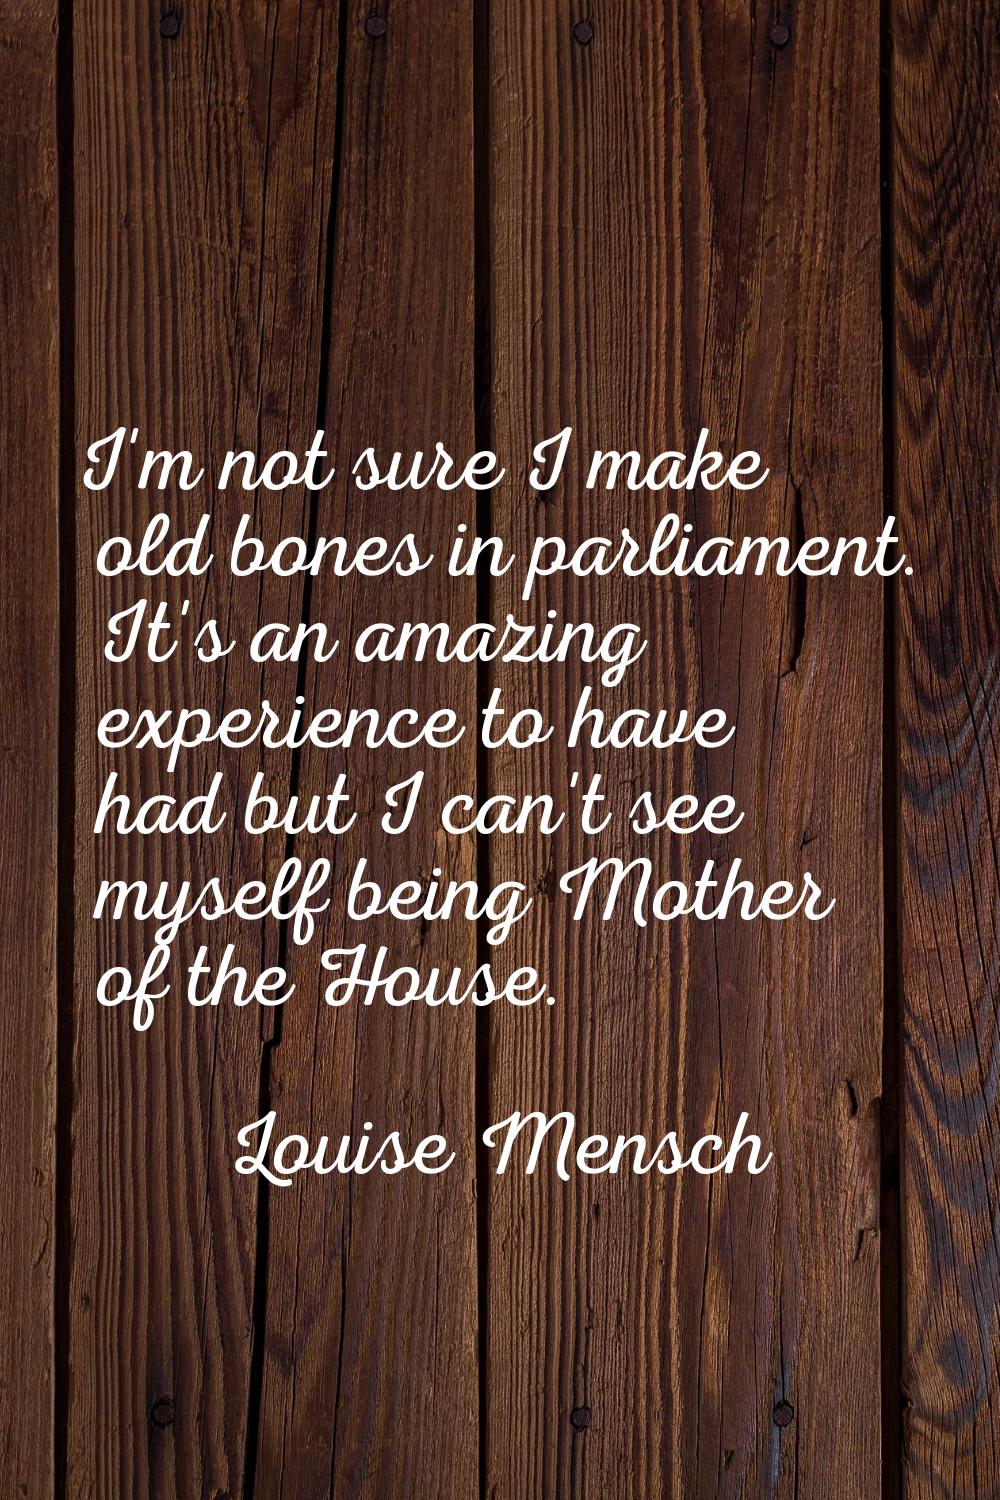 I'm not sure I make old bones in parliament. It's an amazing experience to have had but I can't see